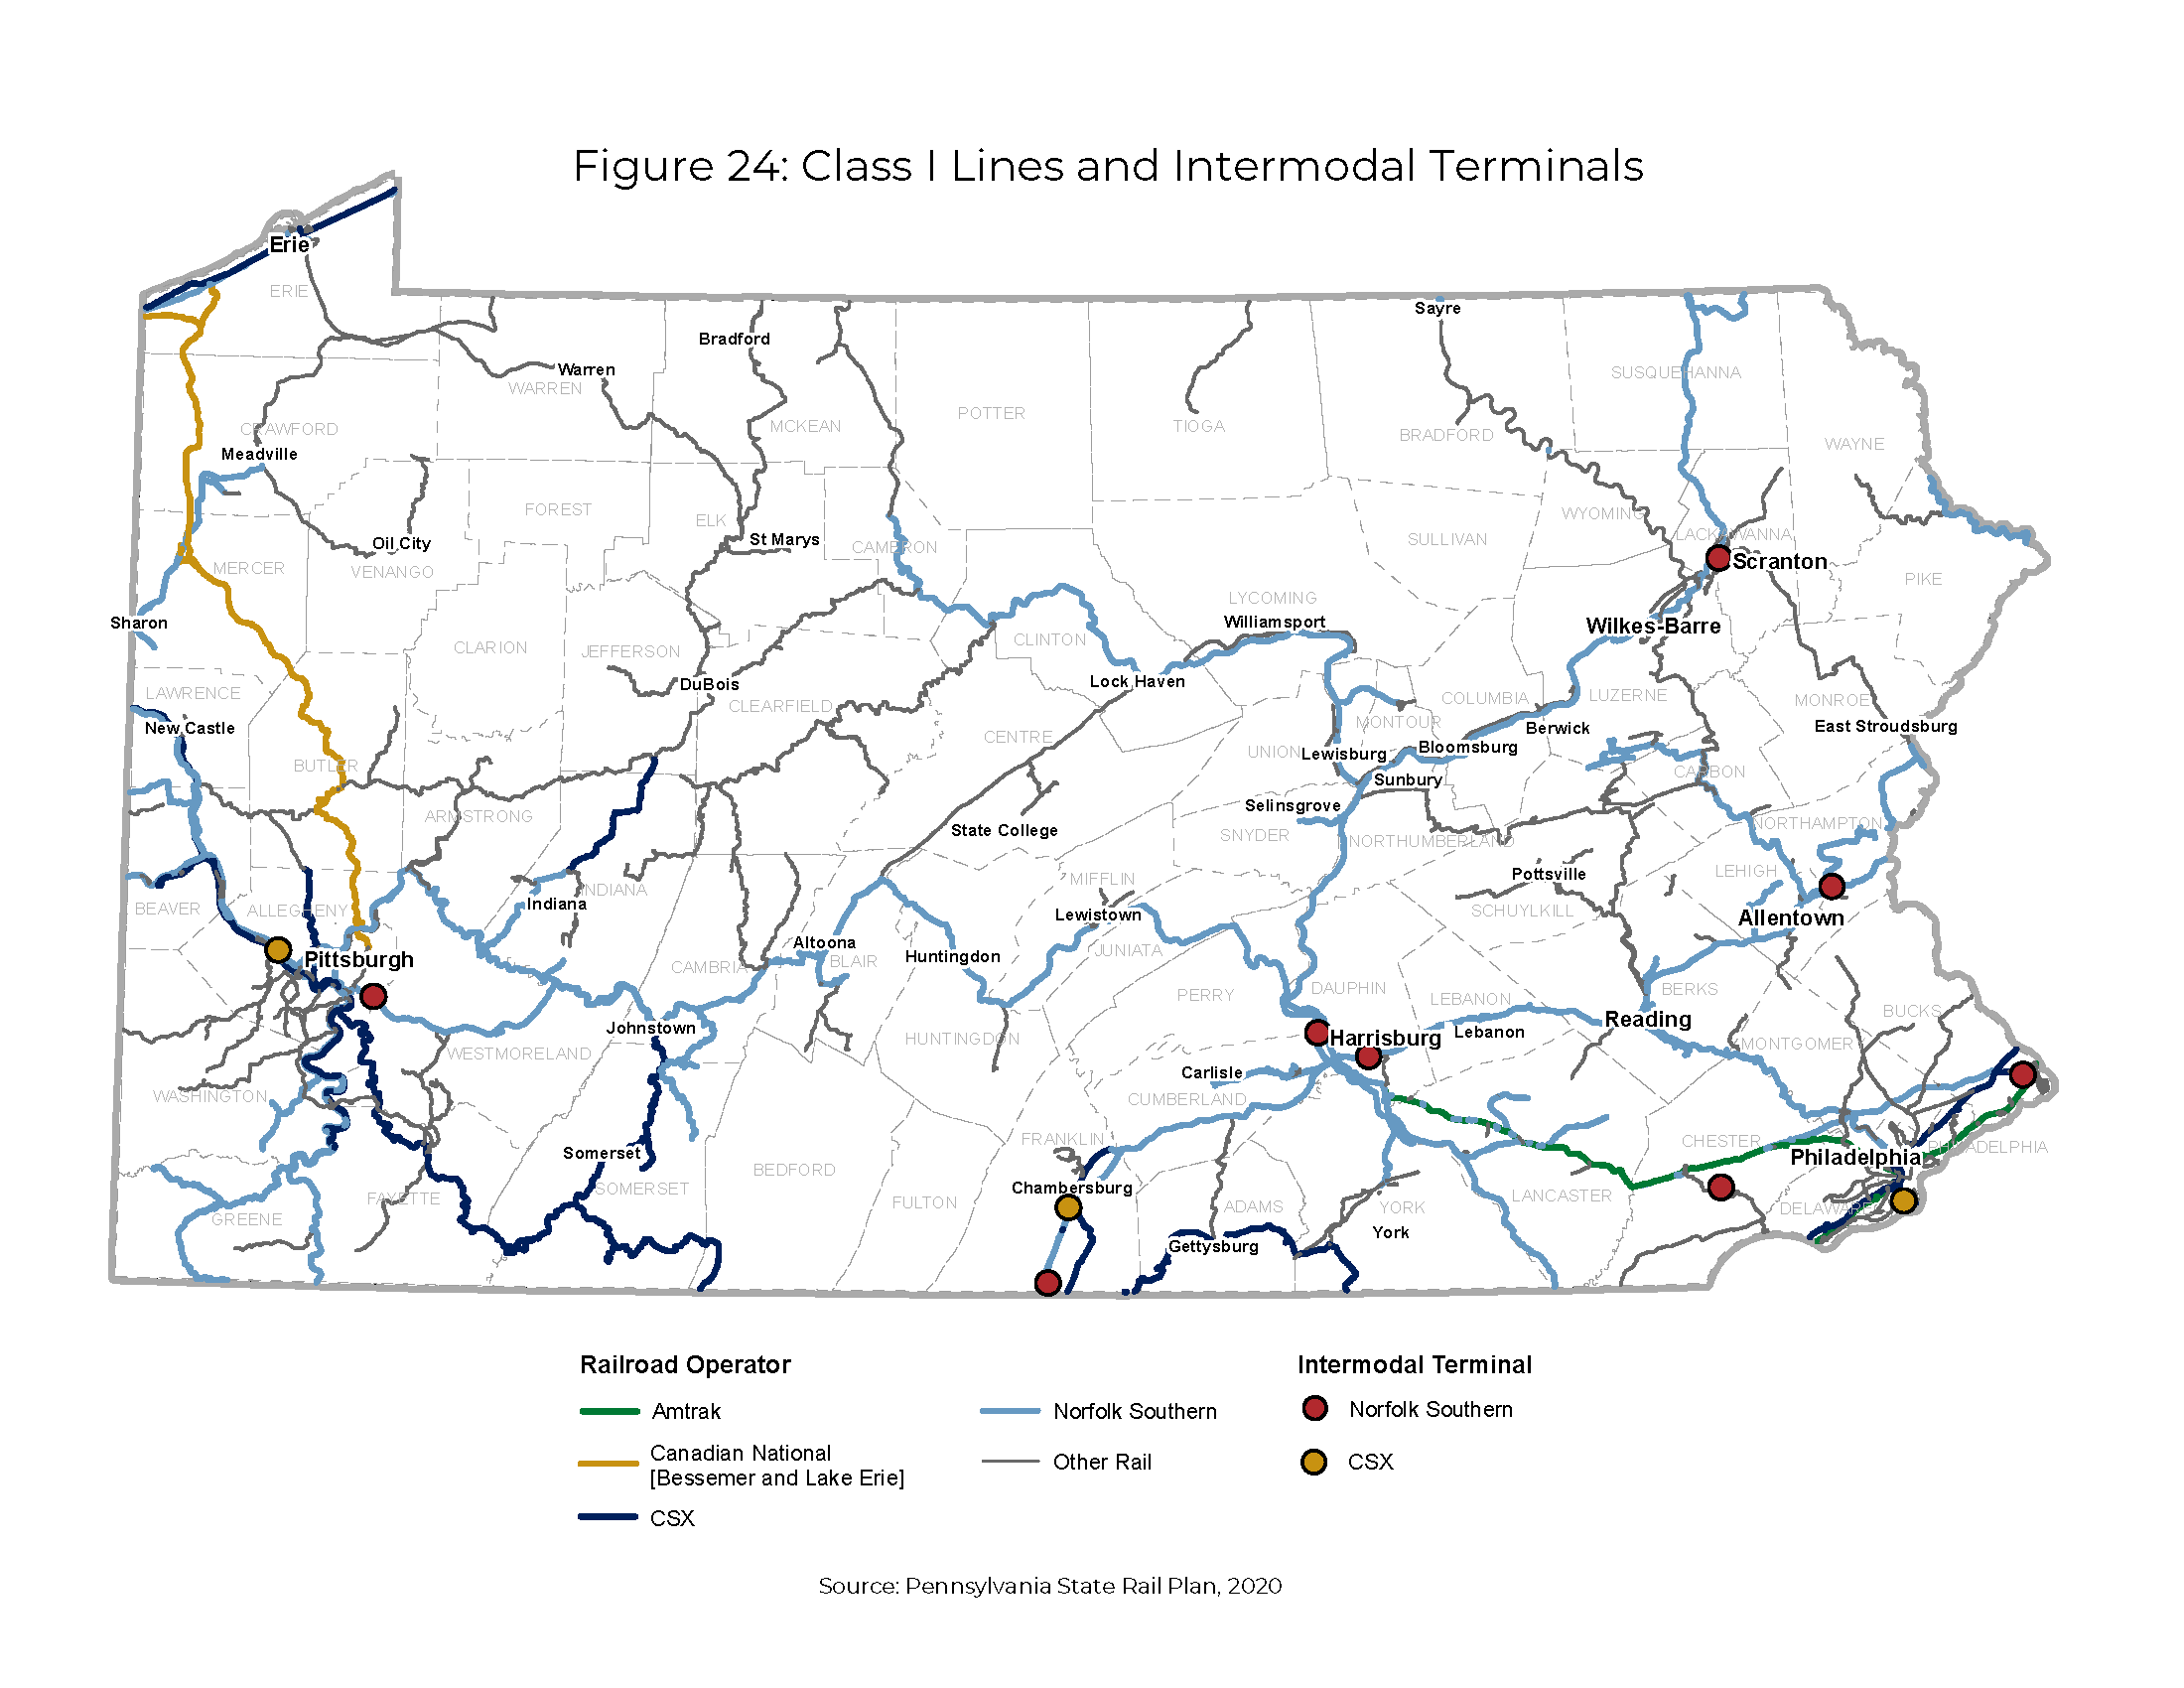 Pennsylvania state map illustrating the Class 1 lines of railroad operators Amtrak, Canadian National (Bessemer and Lake Erie), CSX, Norfolk Southern, and other rails, as well as the Intermodal terminals of Norfolk Southern and CSX.